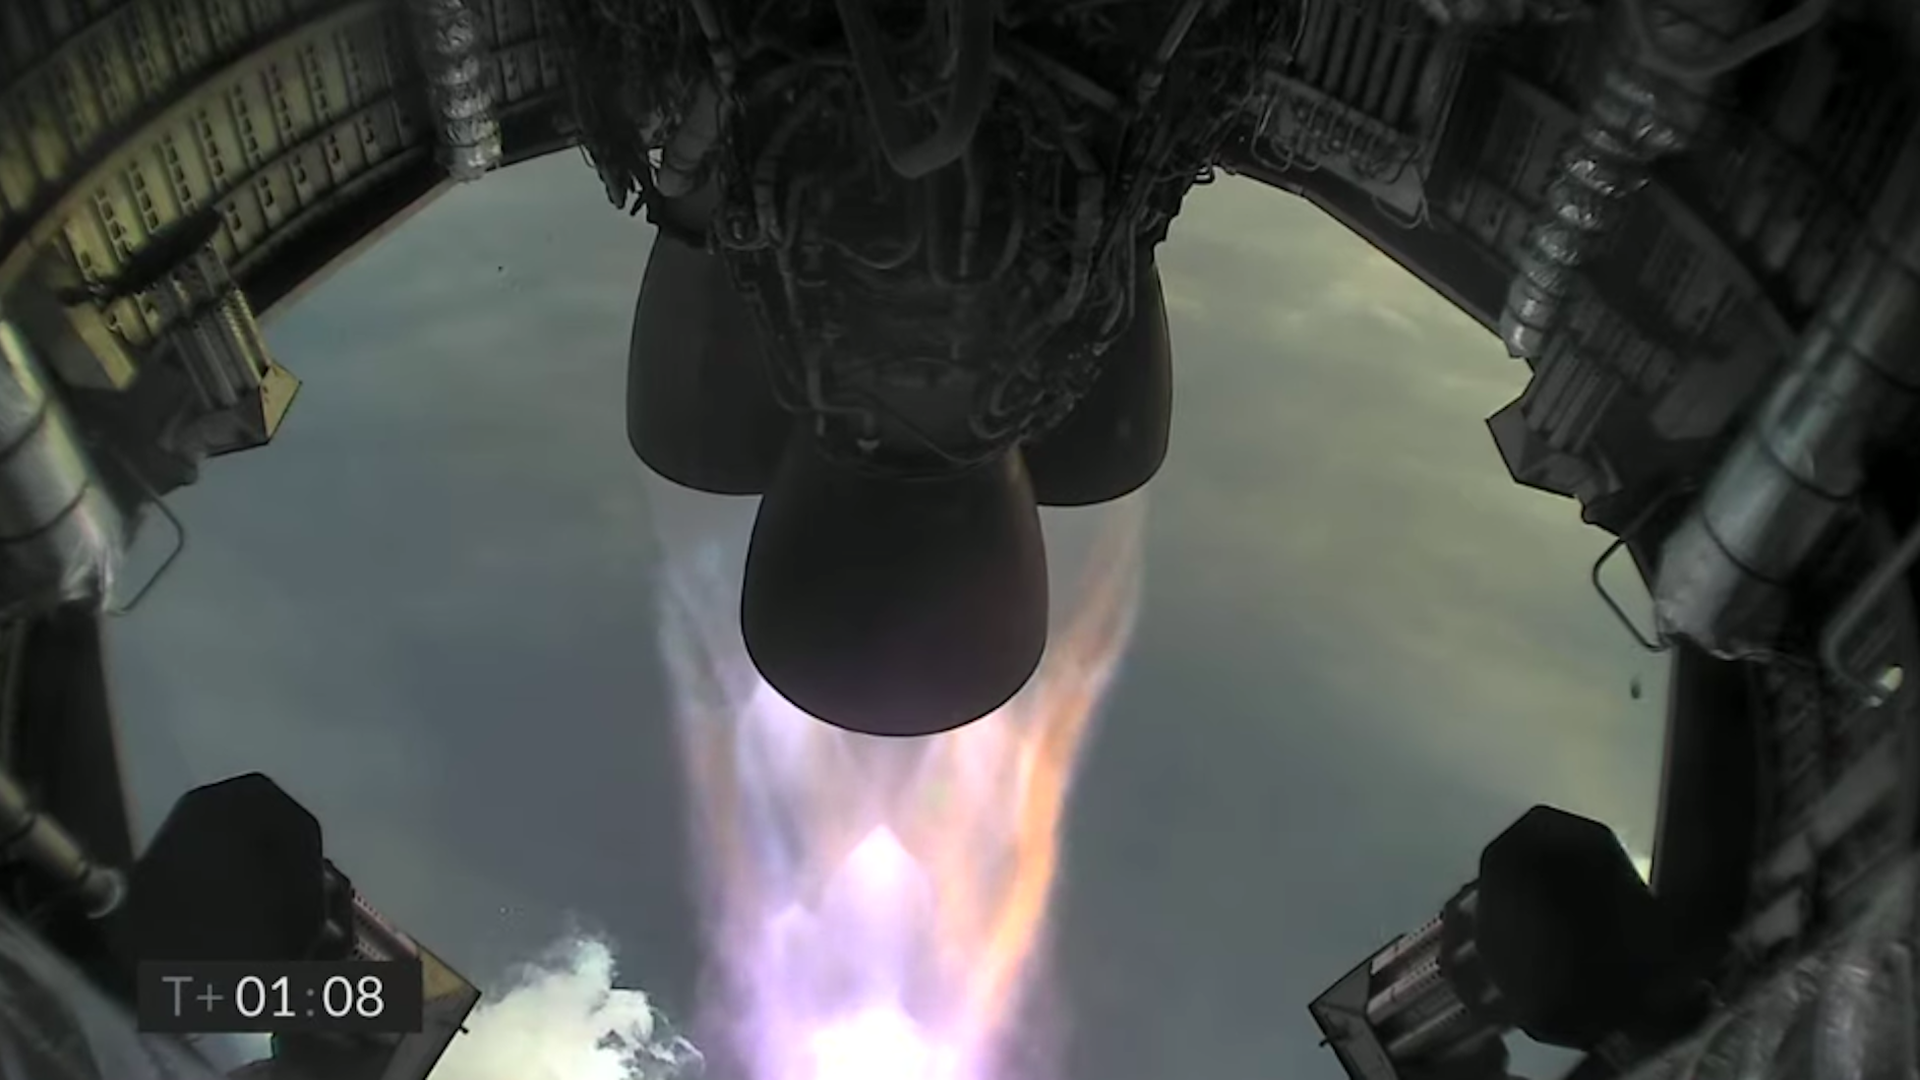 The rocket engines of a prototype SpaceX Starship upon takeoff